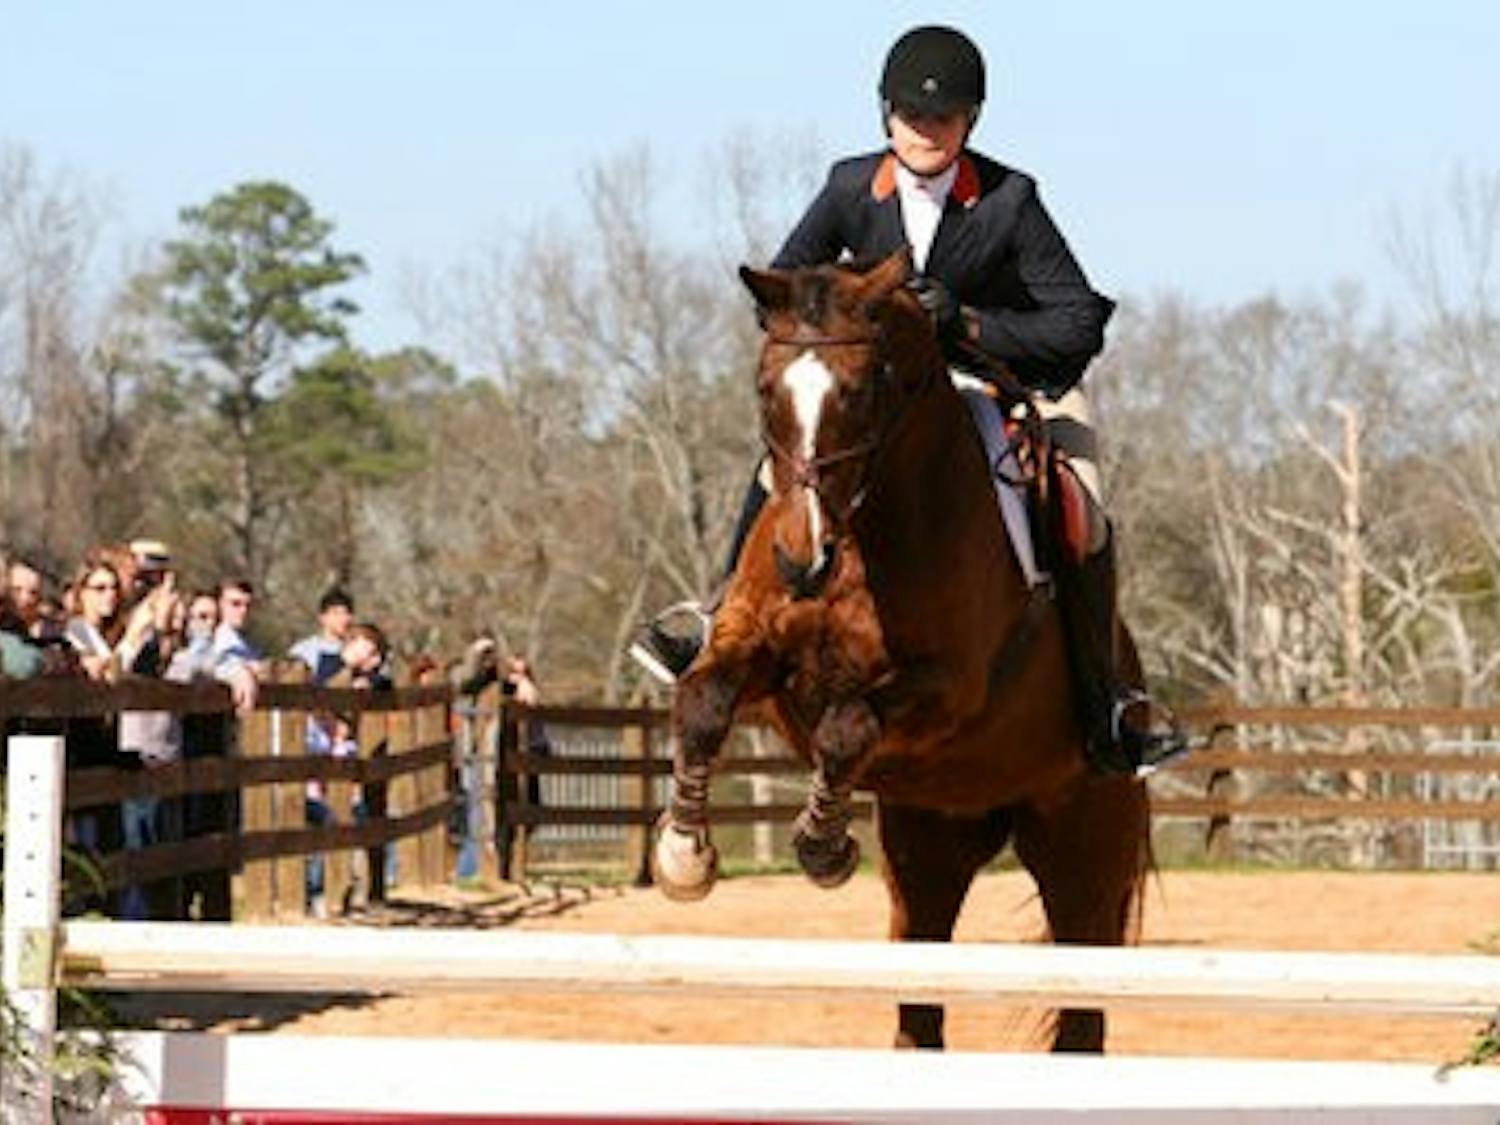 Senior hunt seat rider Anna Becker competes against Oklahoma State Jan. 28. The equestrian team is ranked No. 1 in the country after its victory over the Cowgirls. (FILE PHOTO)